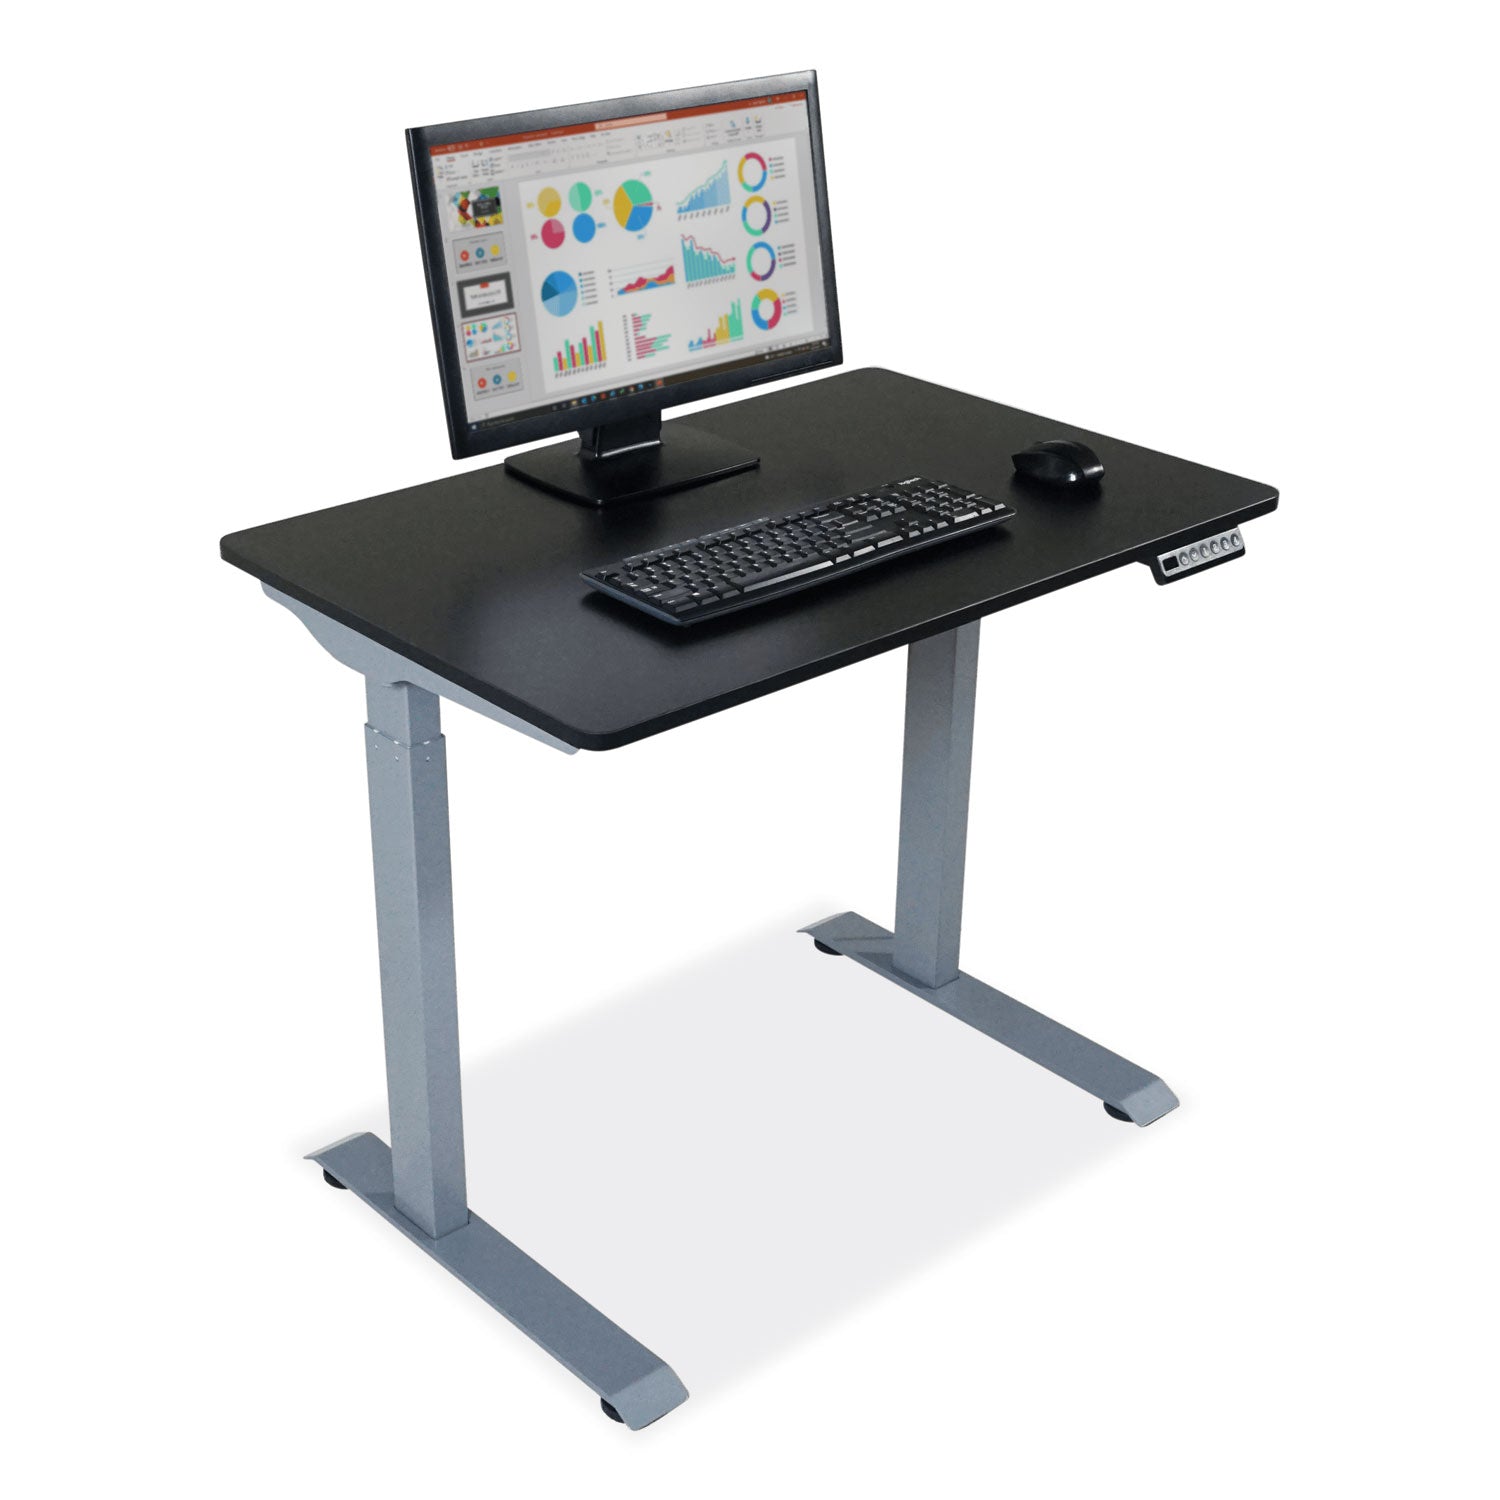 electric-height-adjustable-standing-desk-36-x-236-x-287-to-484-black-ships-in-1-3-business-days_vctdc830b - 3